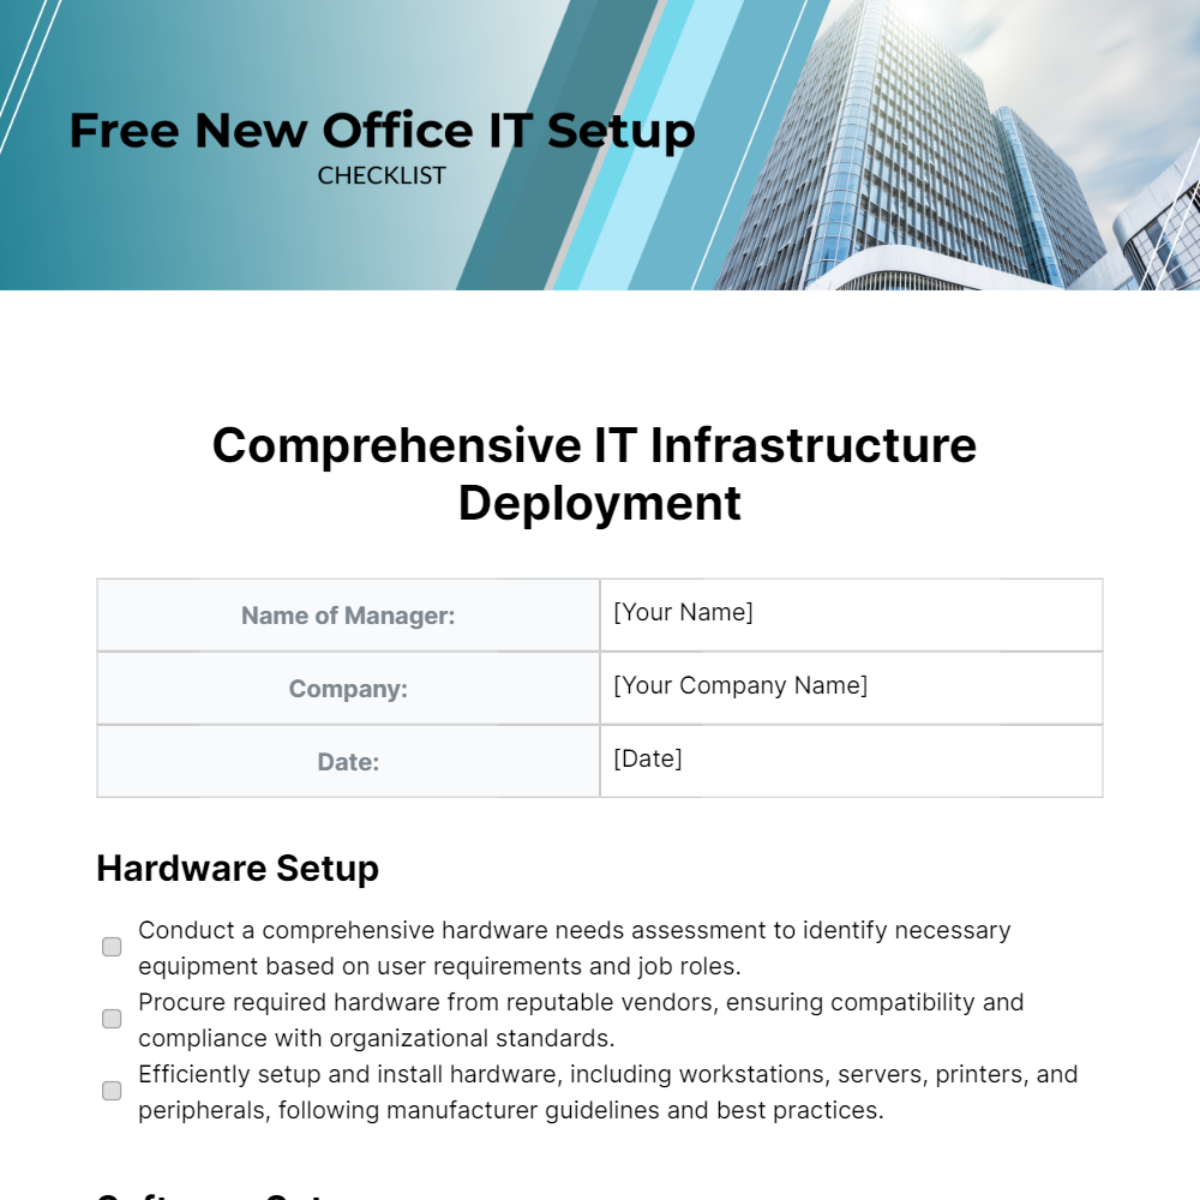 Free New Office IT Setup Checklist Template